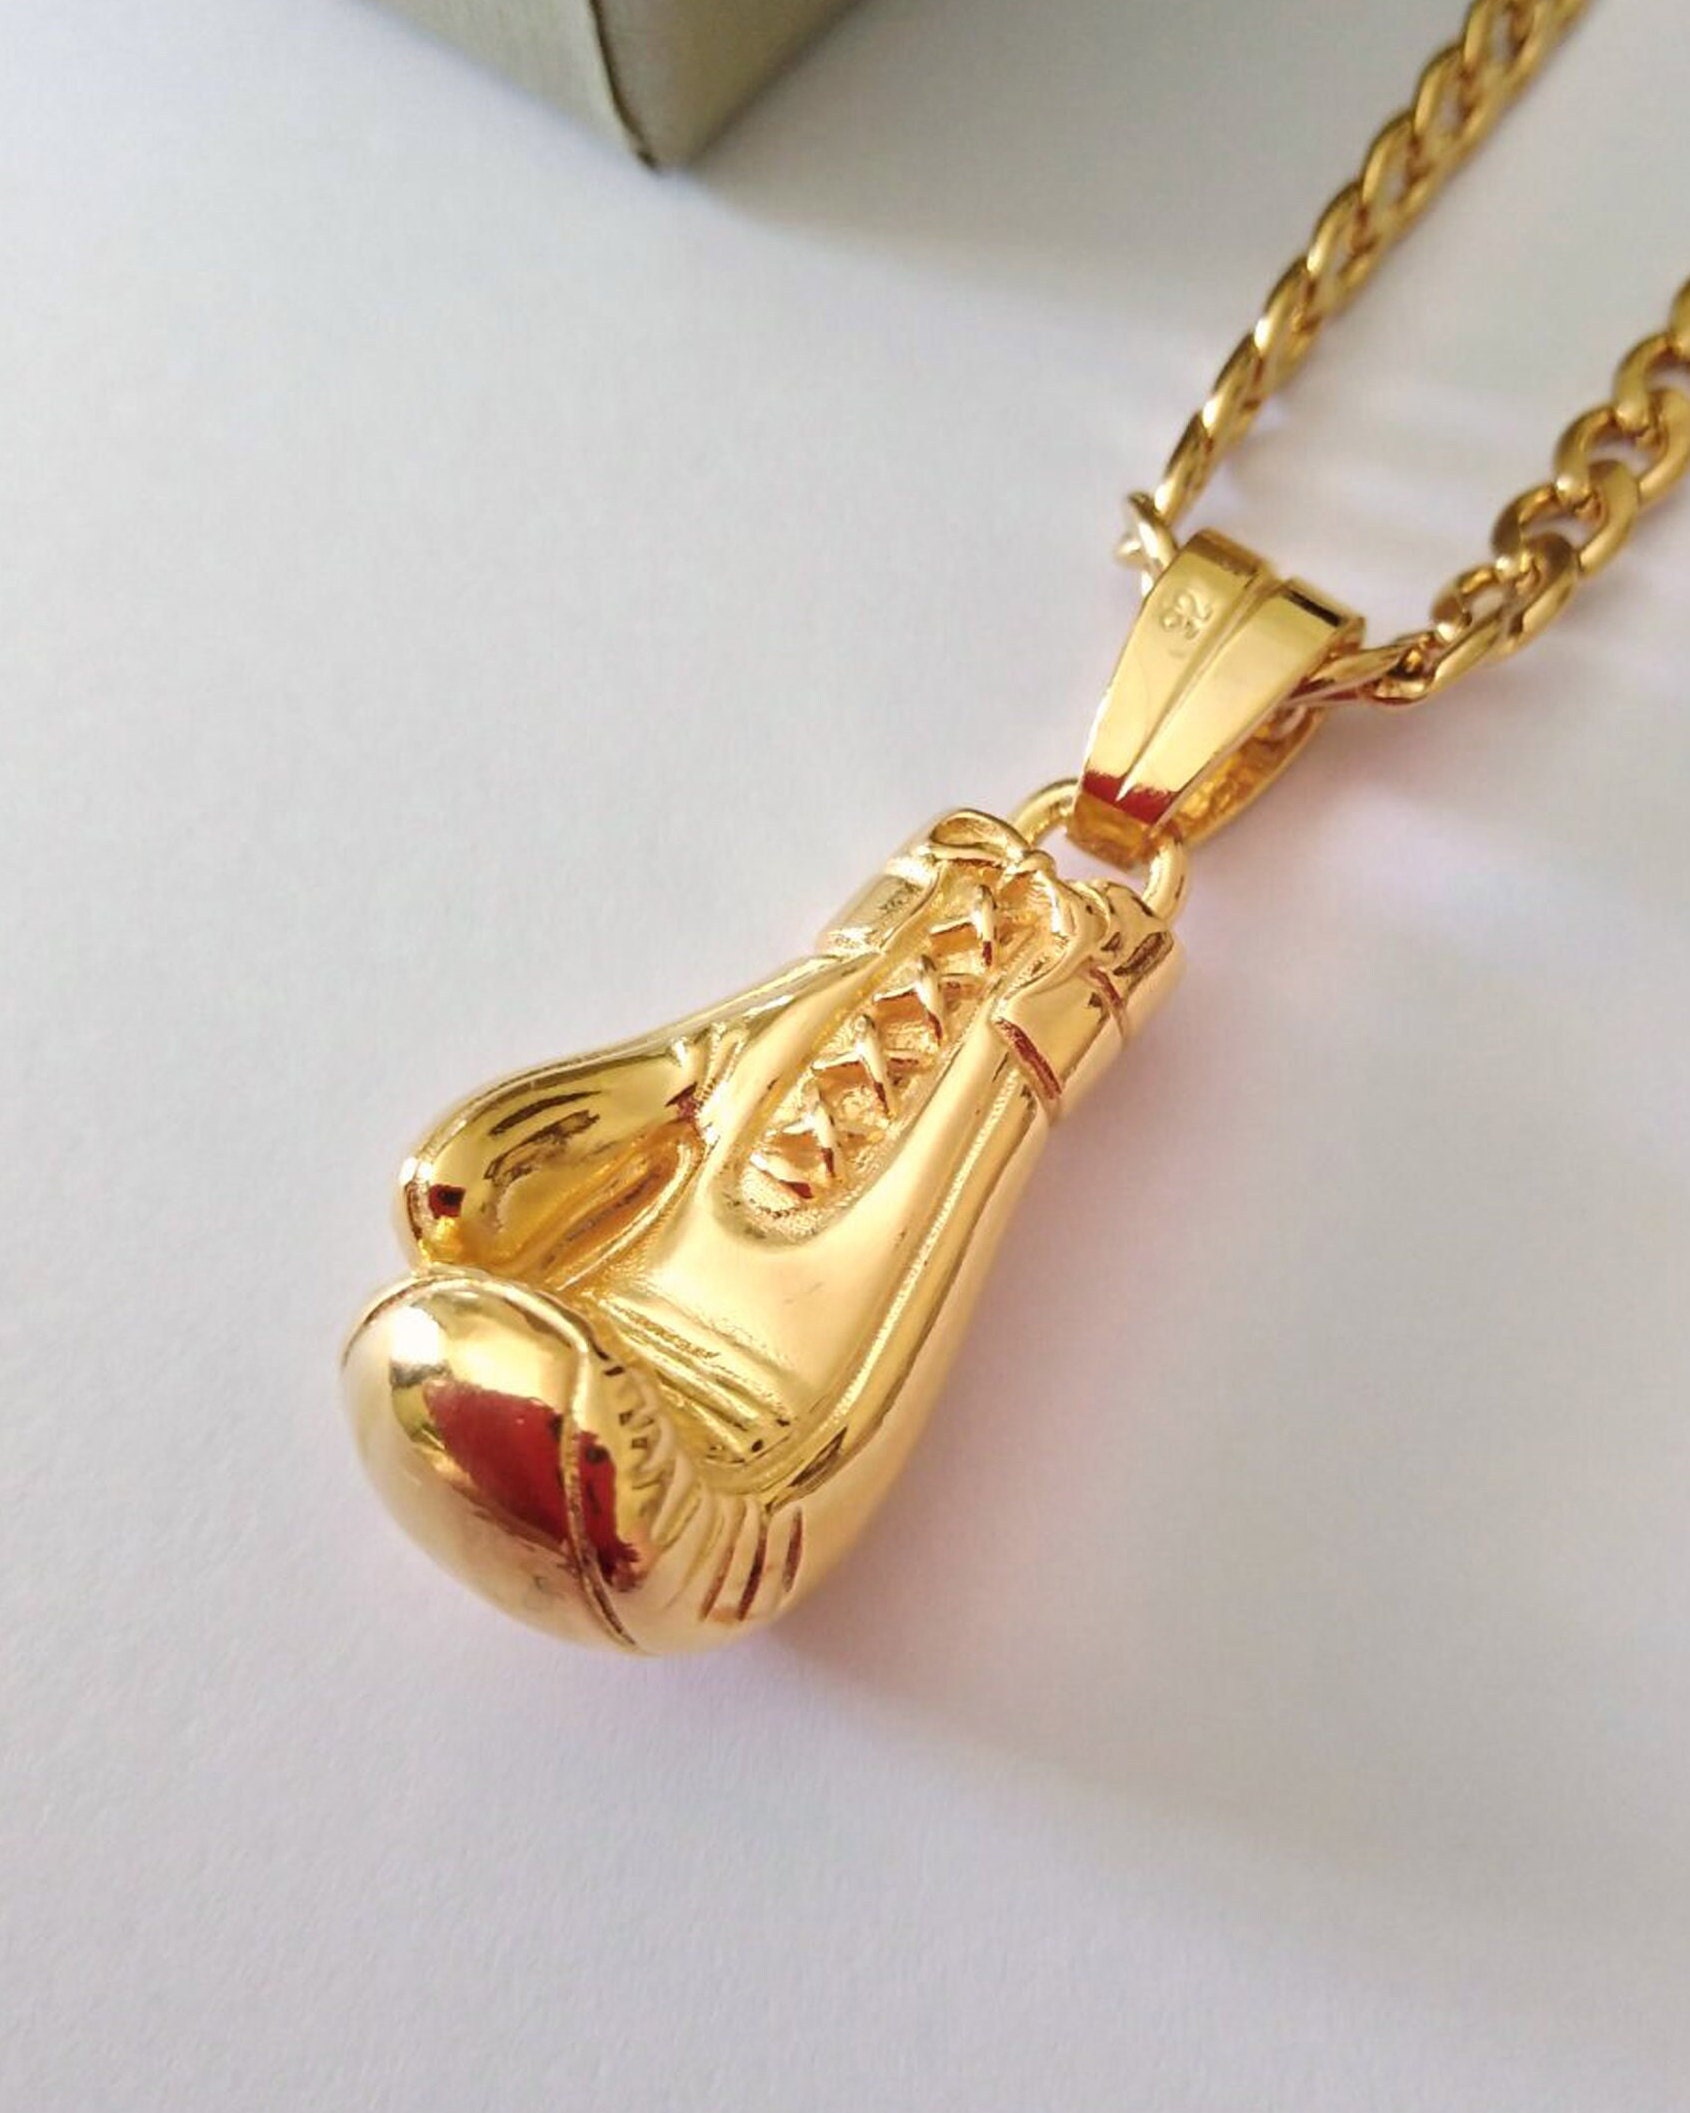 Gold Boxing Gloves Necklace Golden Pair of Boxing Gloves Charm Pendant  Necklace Necklace for Boxers Fighter Boxing Sports Fan Gift - Etsy Sweden